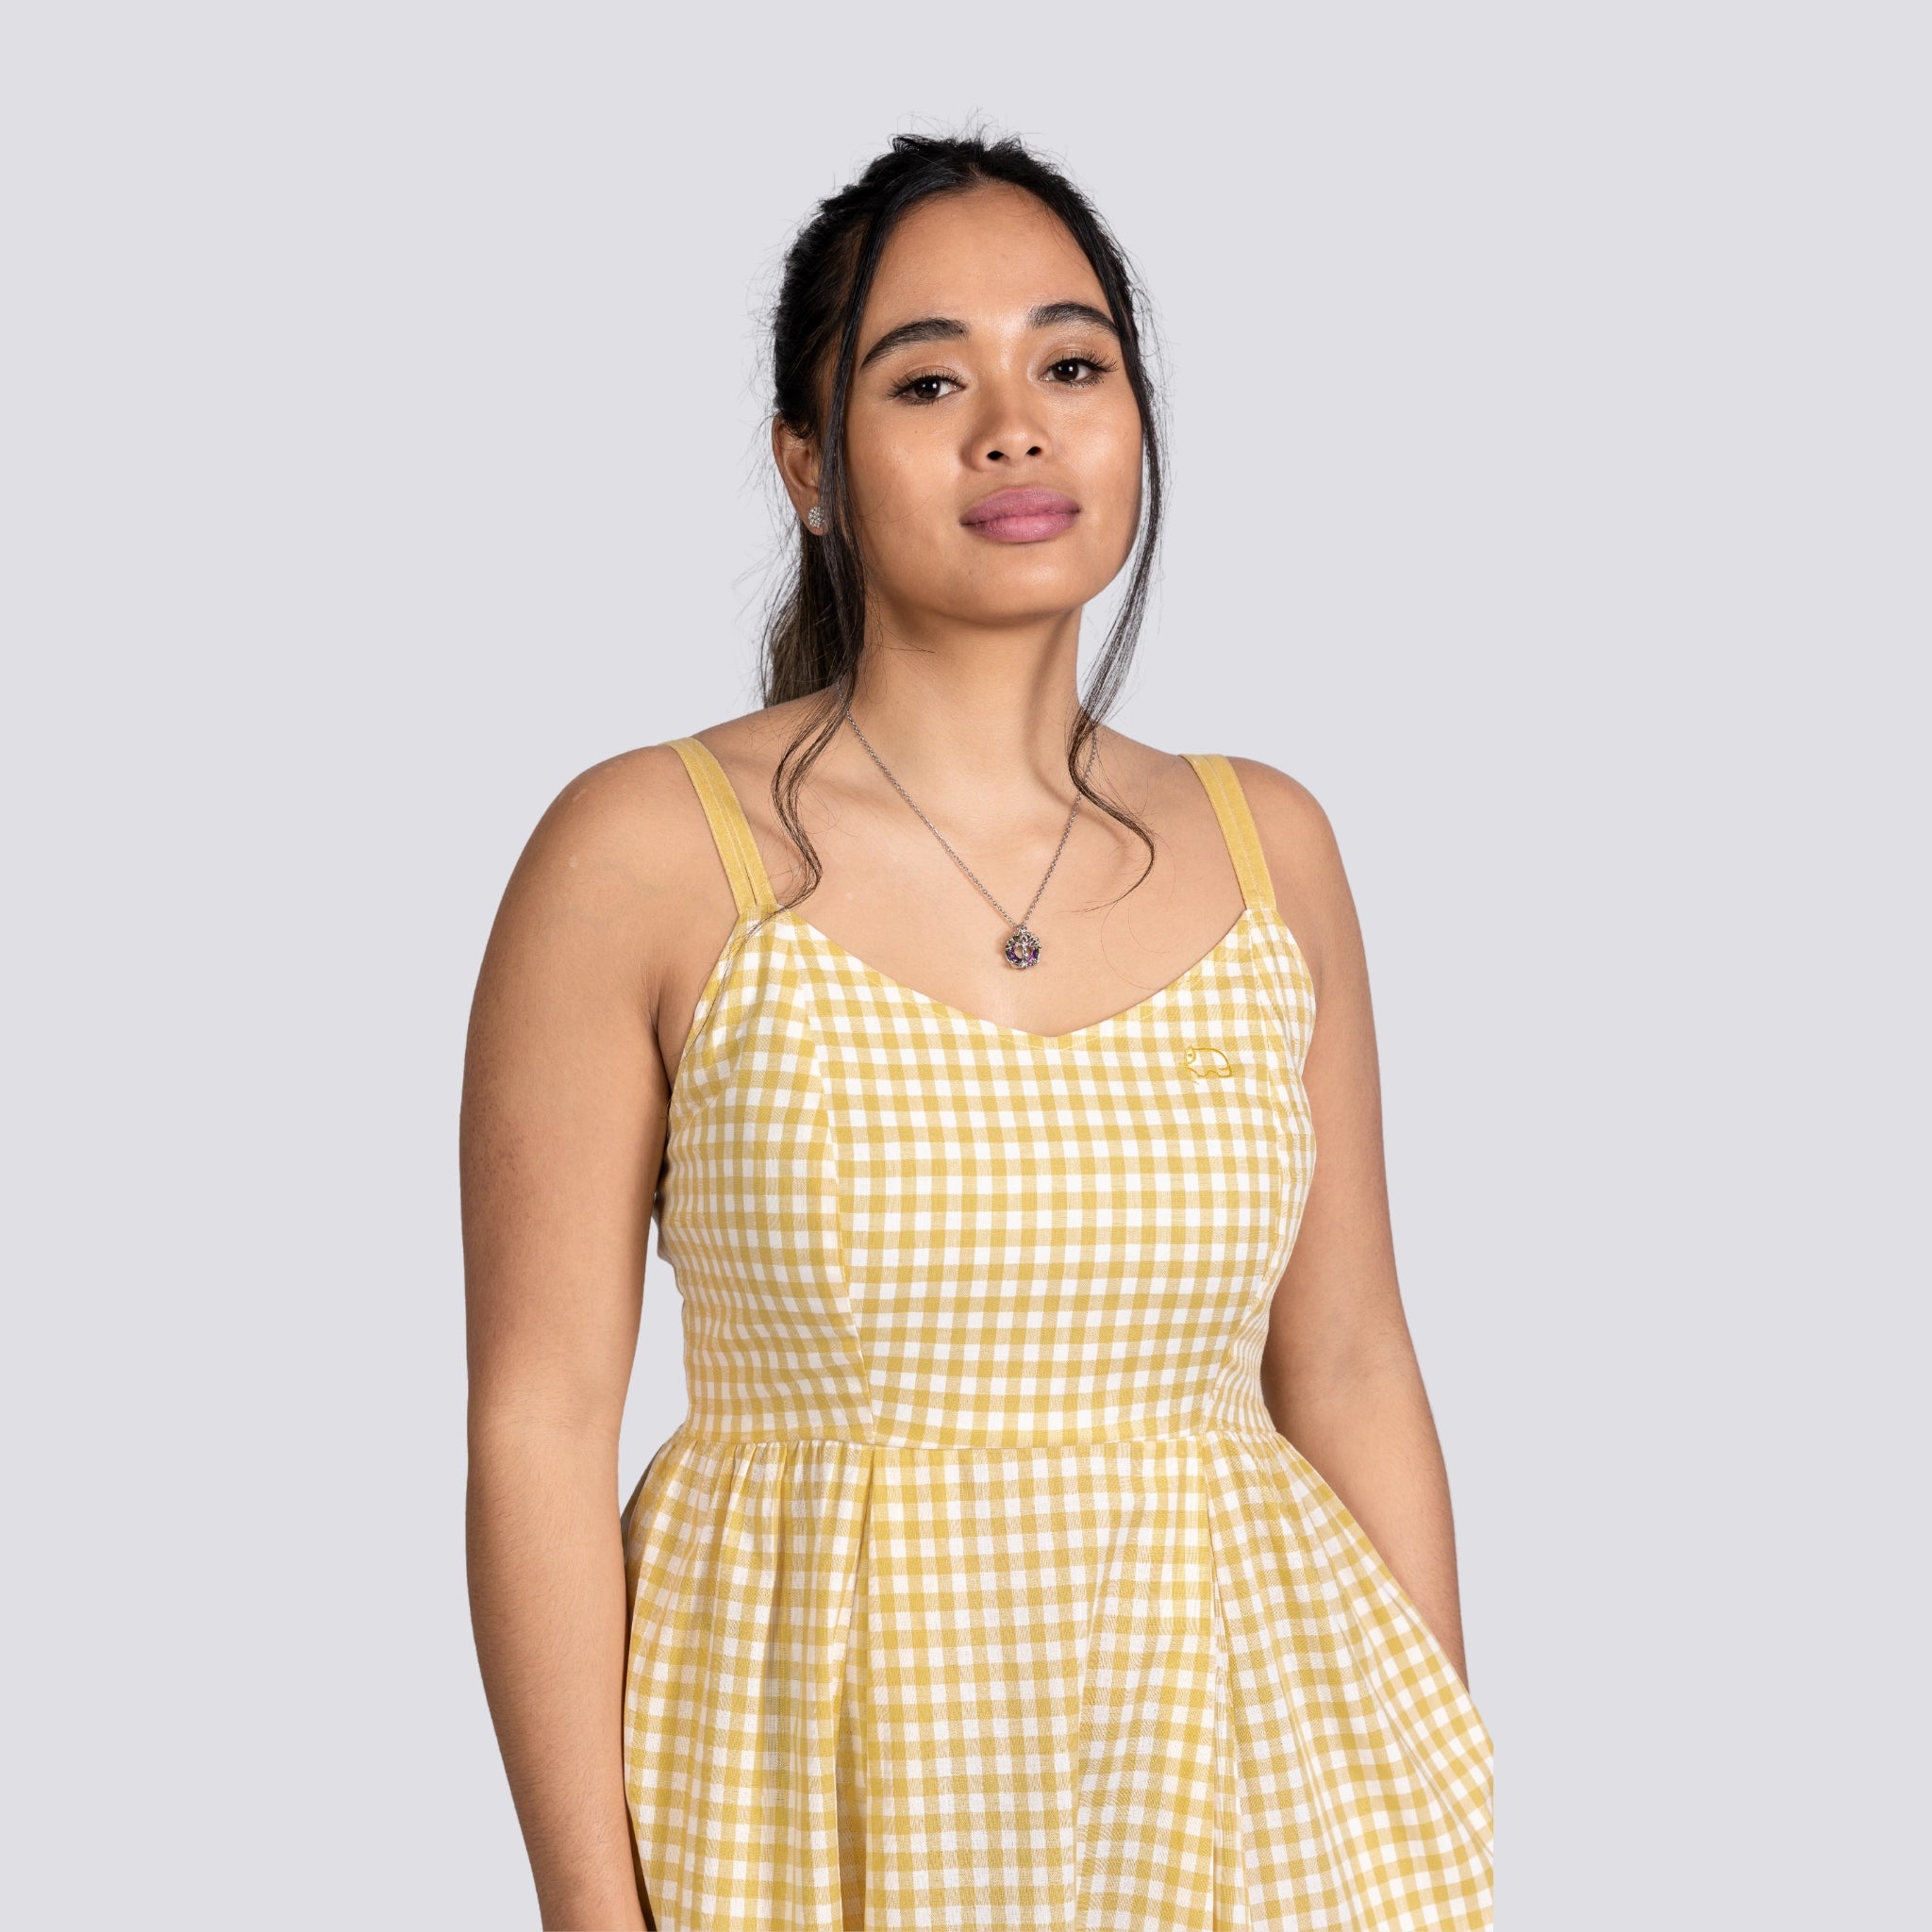 A woman in a Karee Sunshine Chic Yellow Plaid Cotton Mini Dress stands against a gray background, looking calmly at the camera.